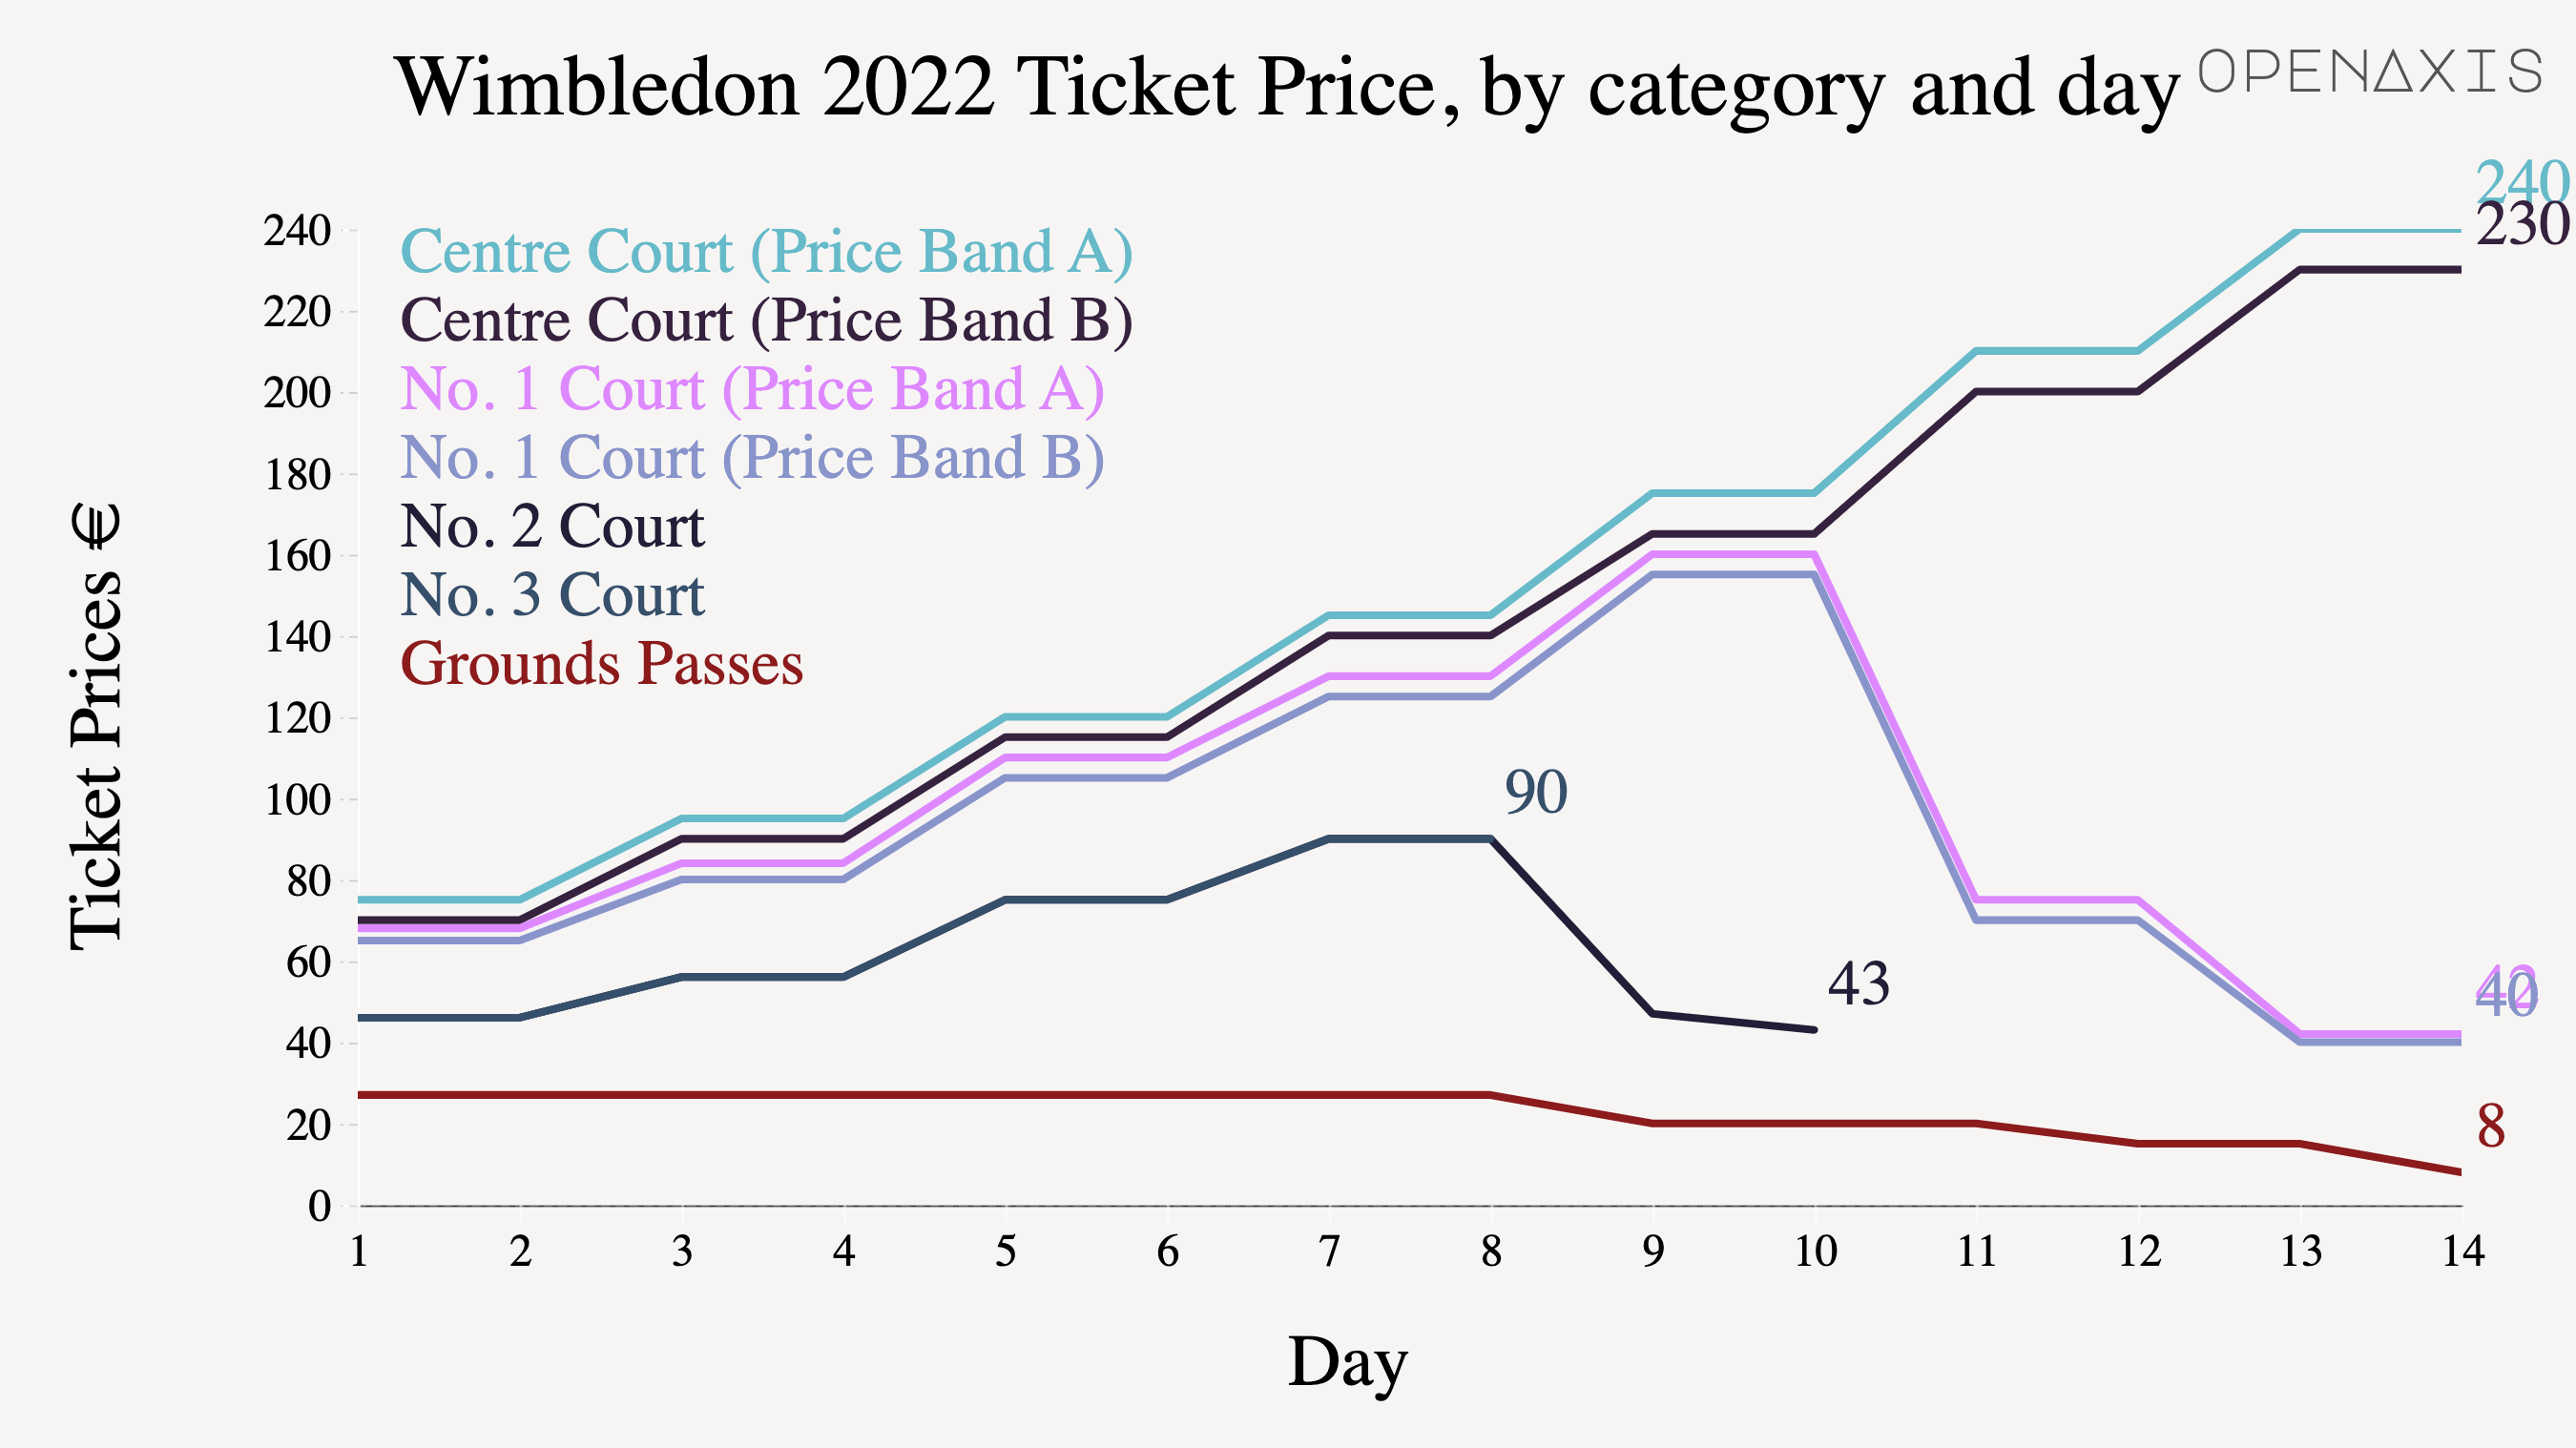 "Wimbledon 2022 Ticket Price, by category and day"